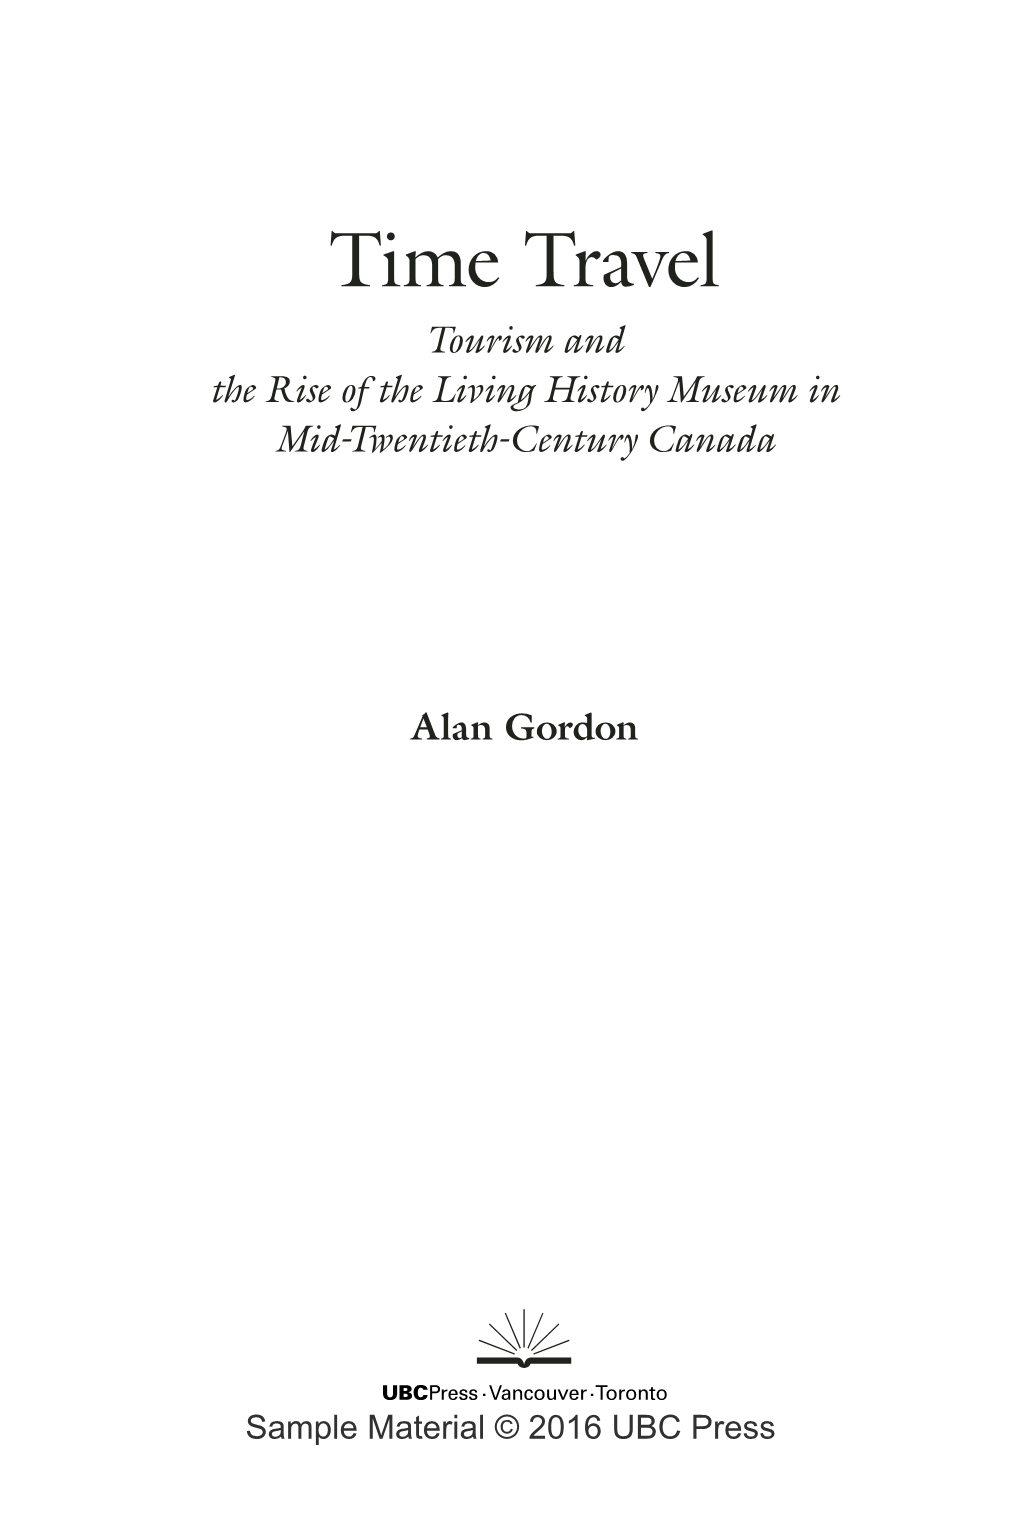 Time Travel Tourism and the Rise of the Living History Museum in Mid-Twentieth-Century Canada